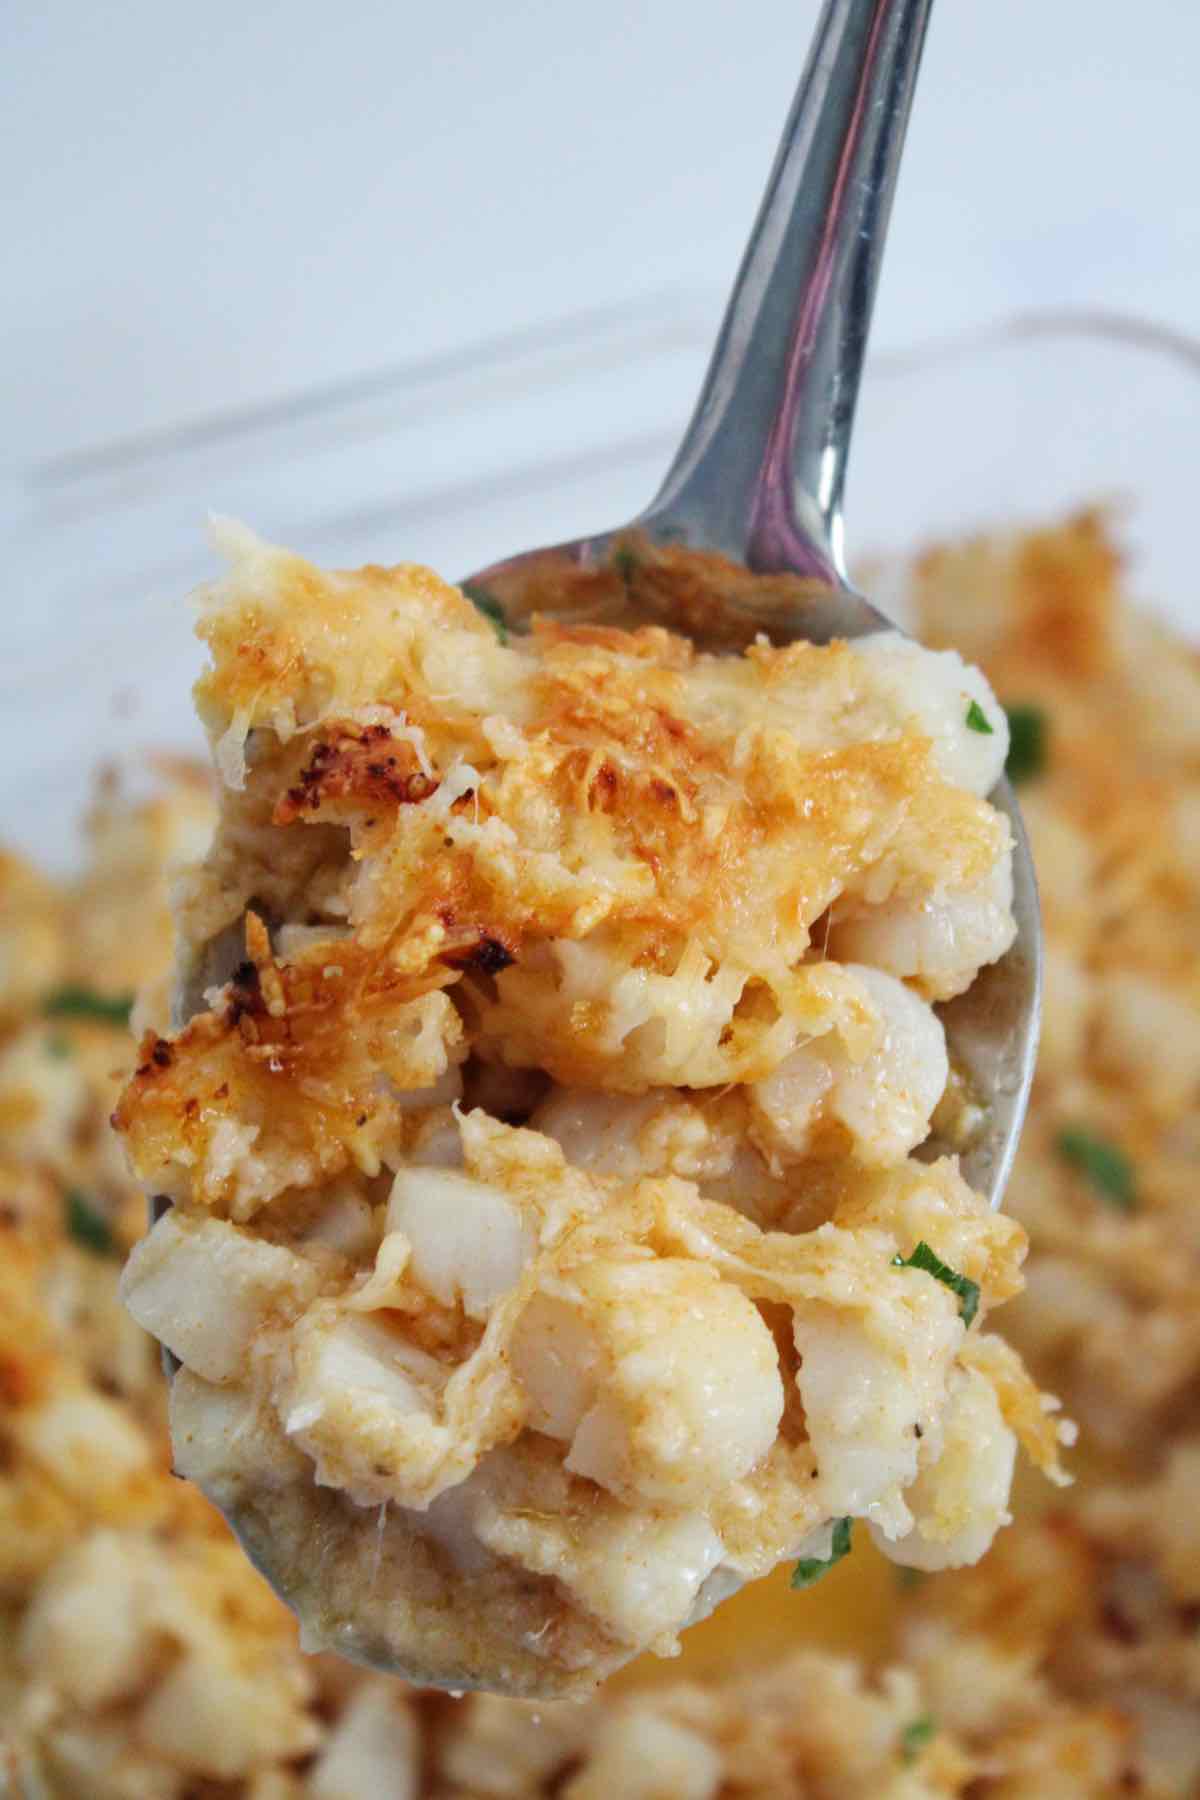 Baked cheesy parmesan scallops will quickly become a family favorite in your household.